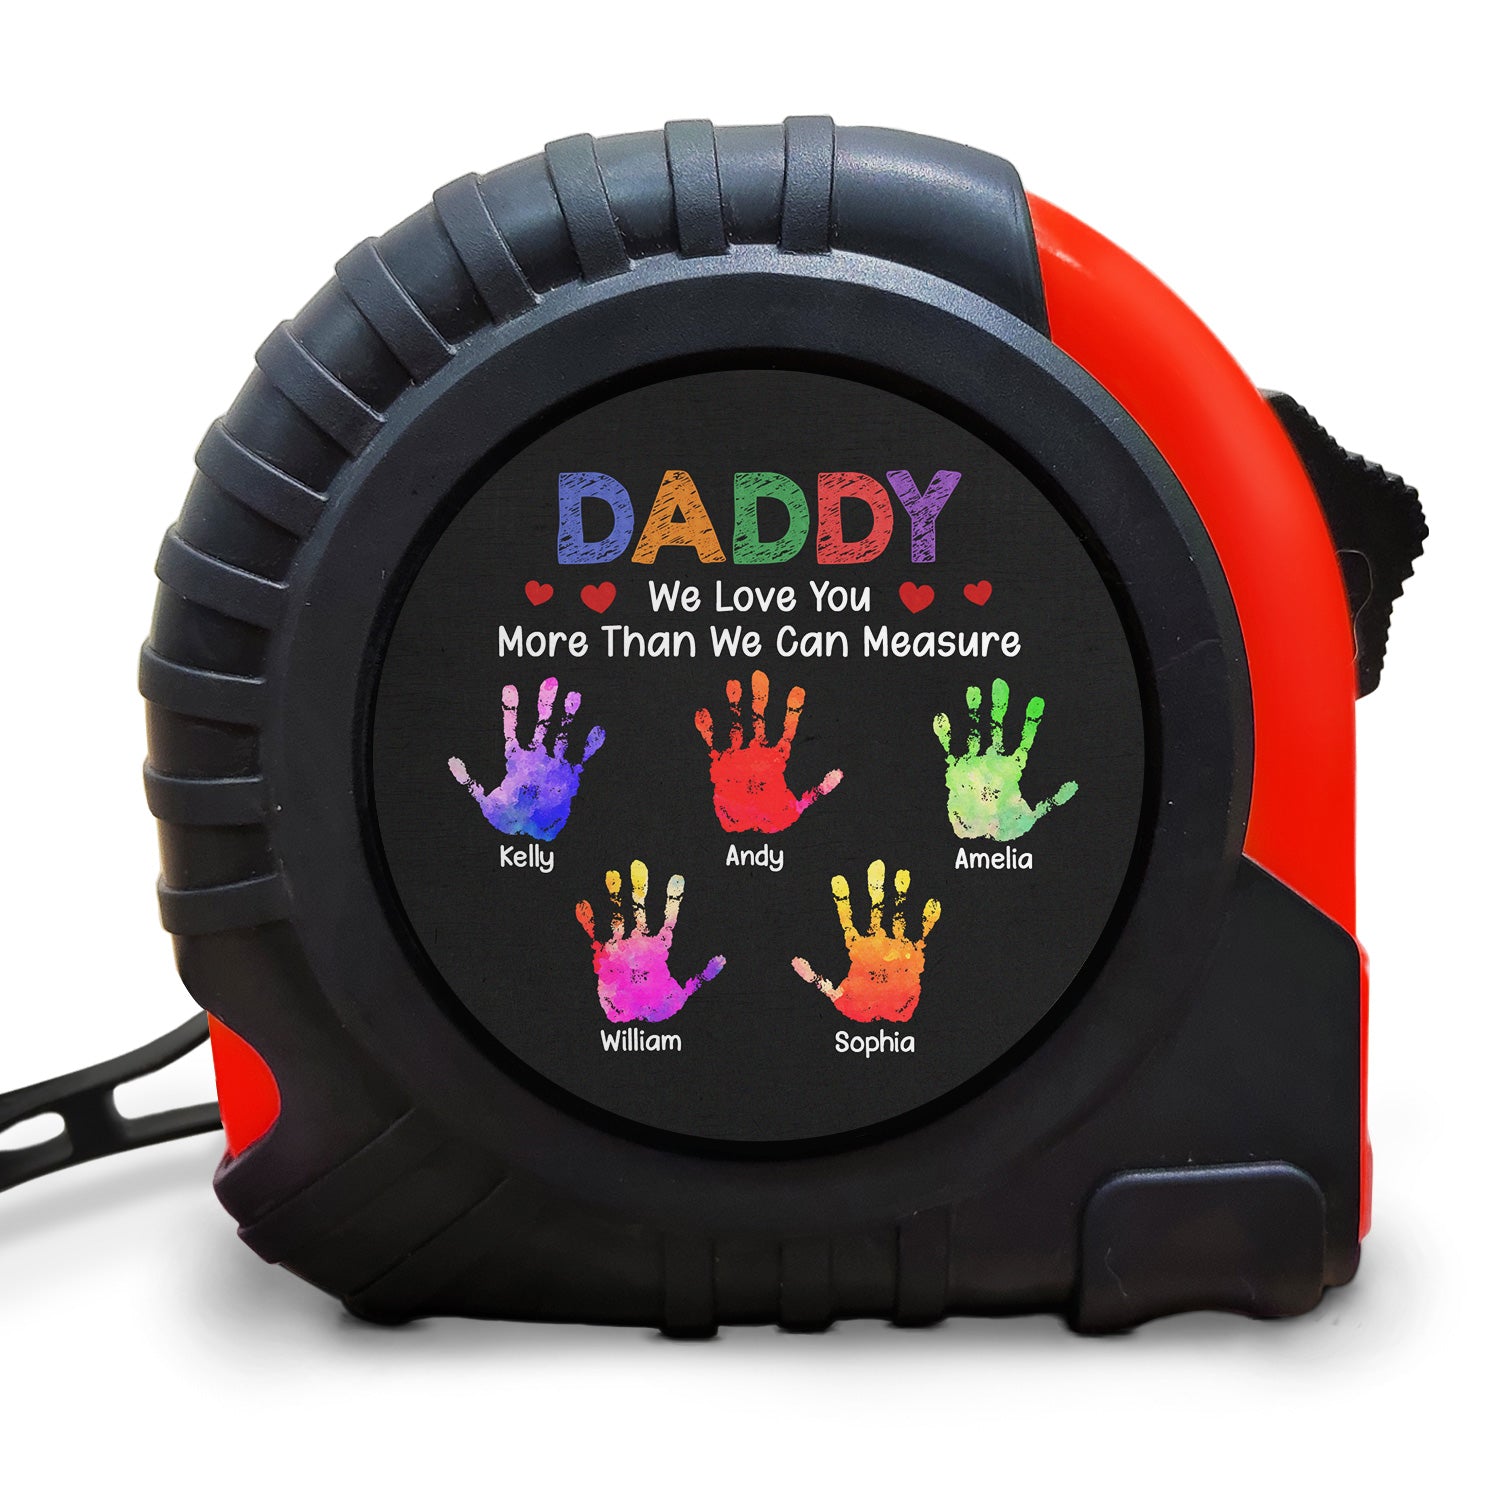 Daddy We Love You More Than We Can Measure - Personalized Tape Measure